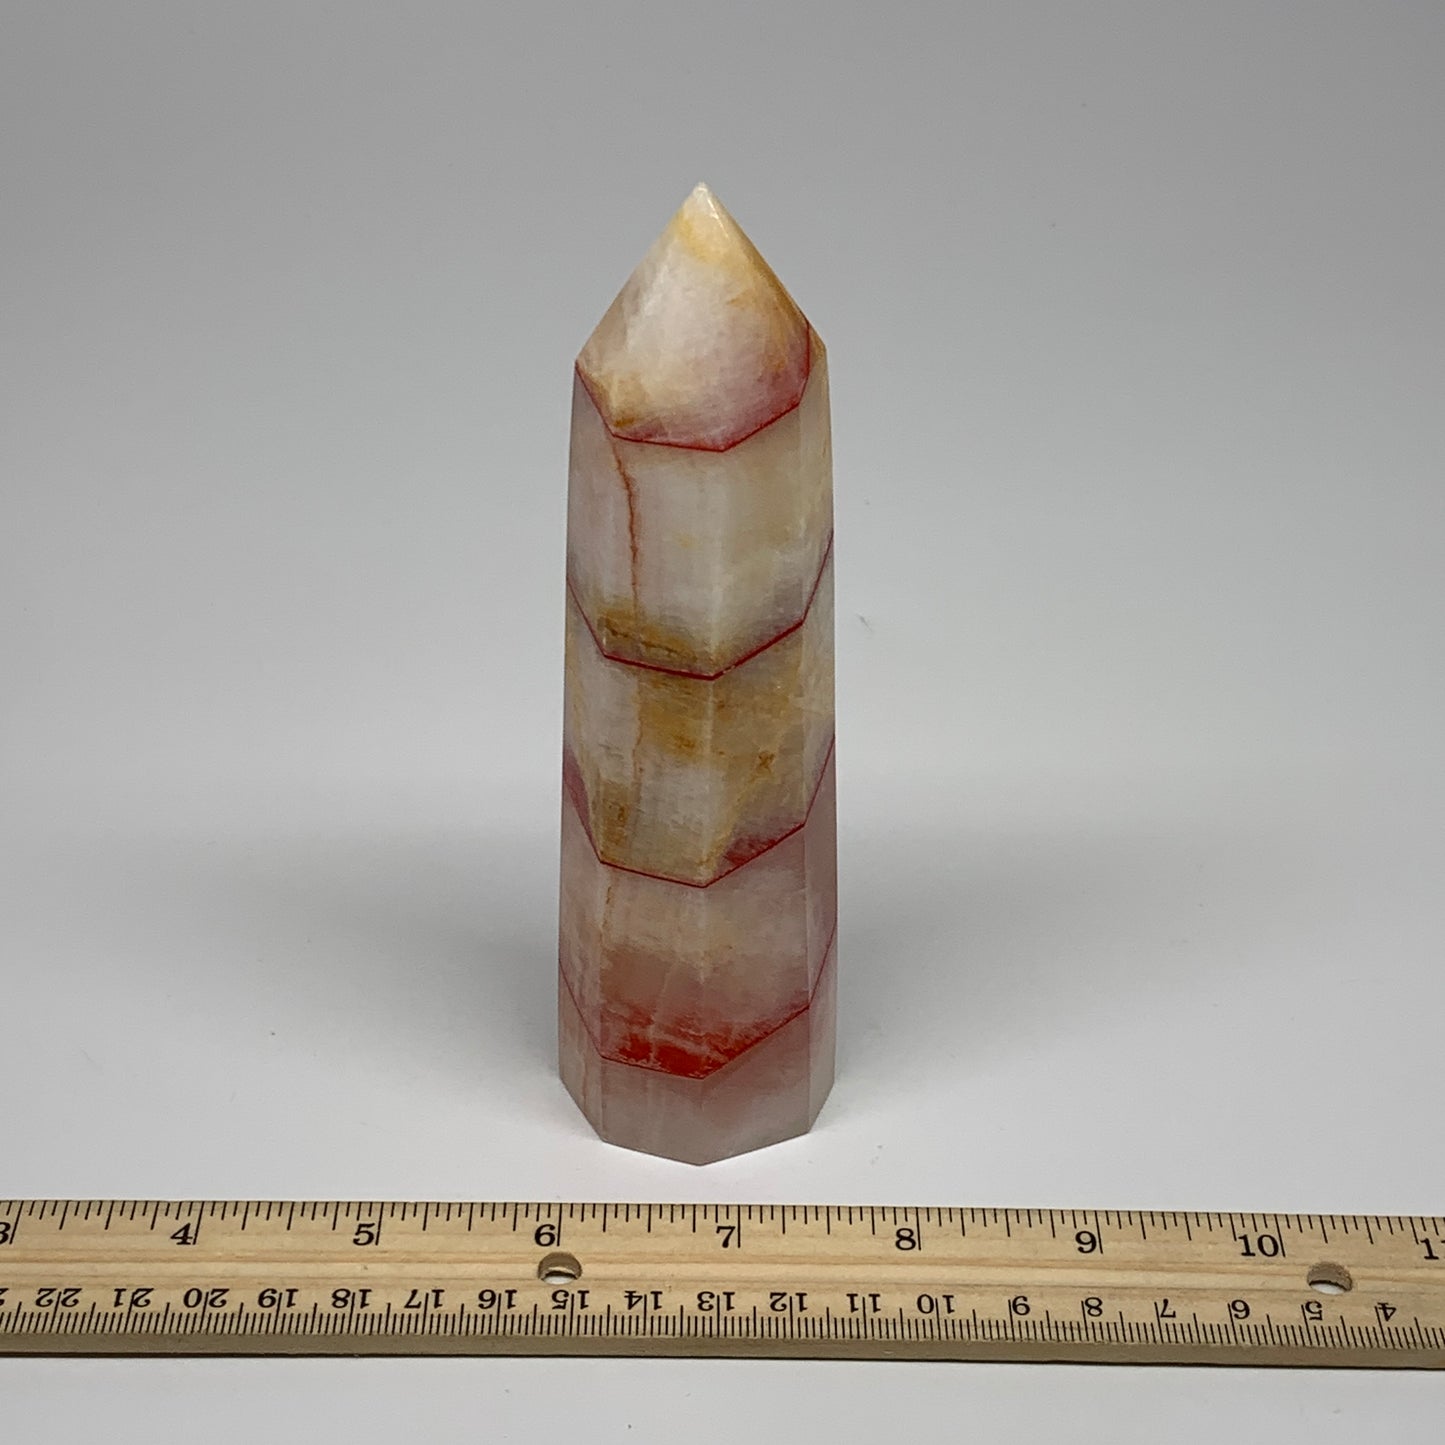 359.5g, 5.8"x1.6"x1.5" Dyed/Heated Calcite Point Tower Obelisk Crystal, B24980